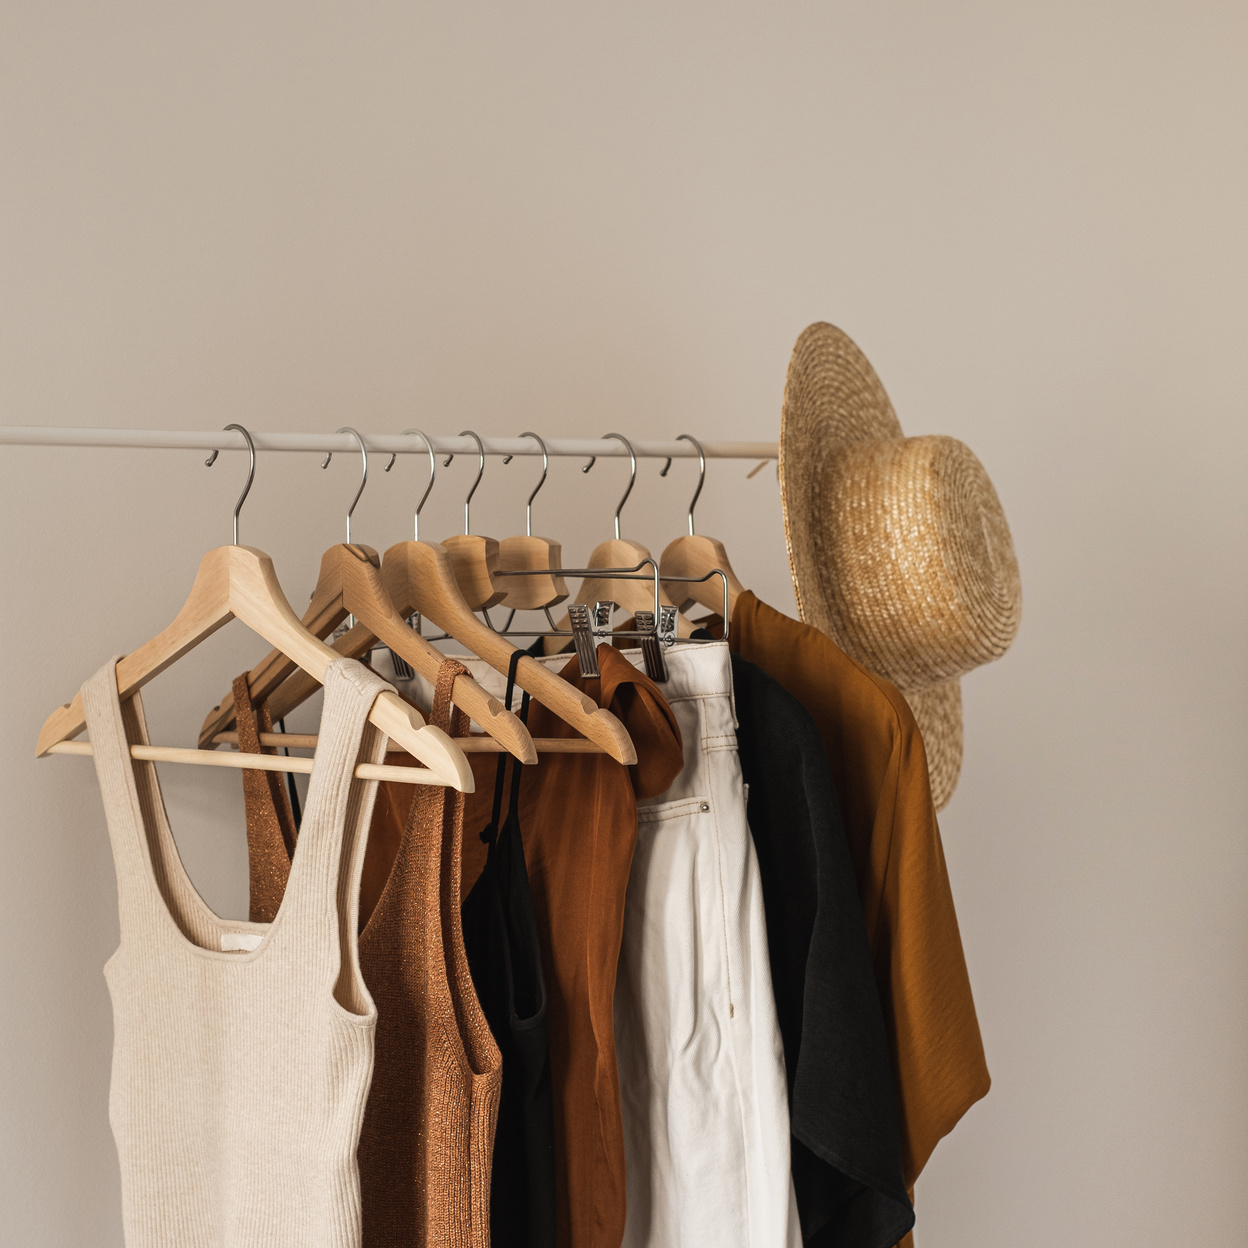 Clothes and a Straw Hat Hanging on a Rack